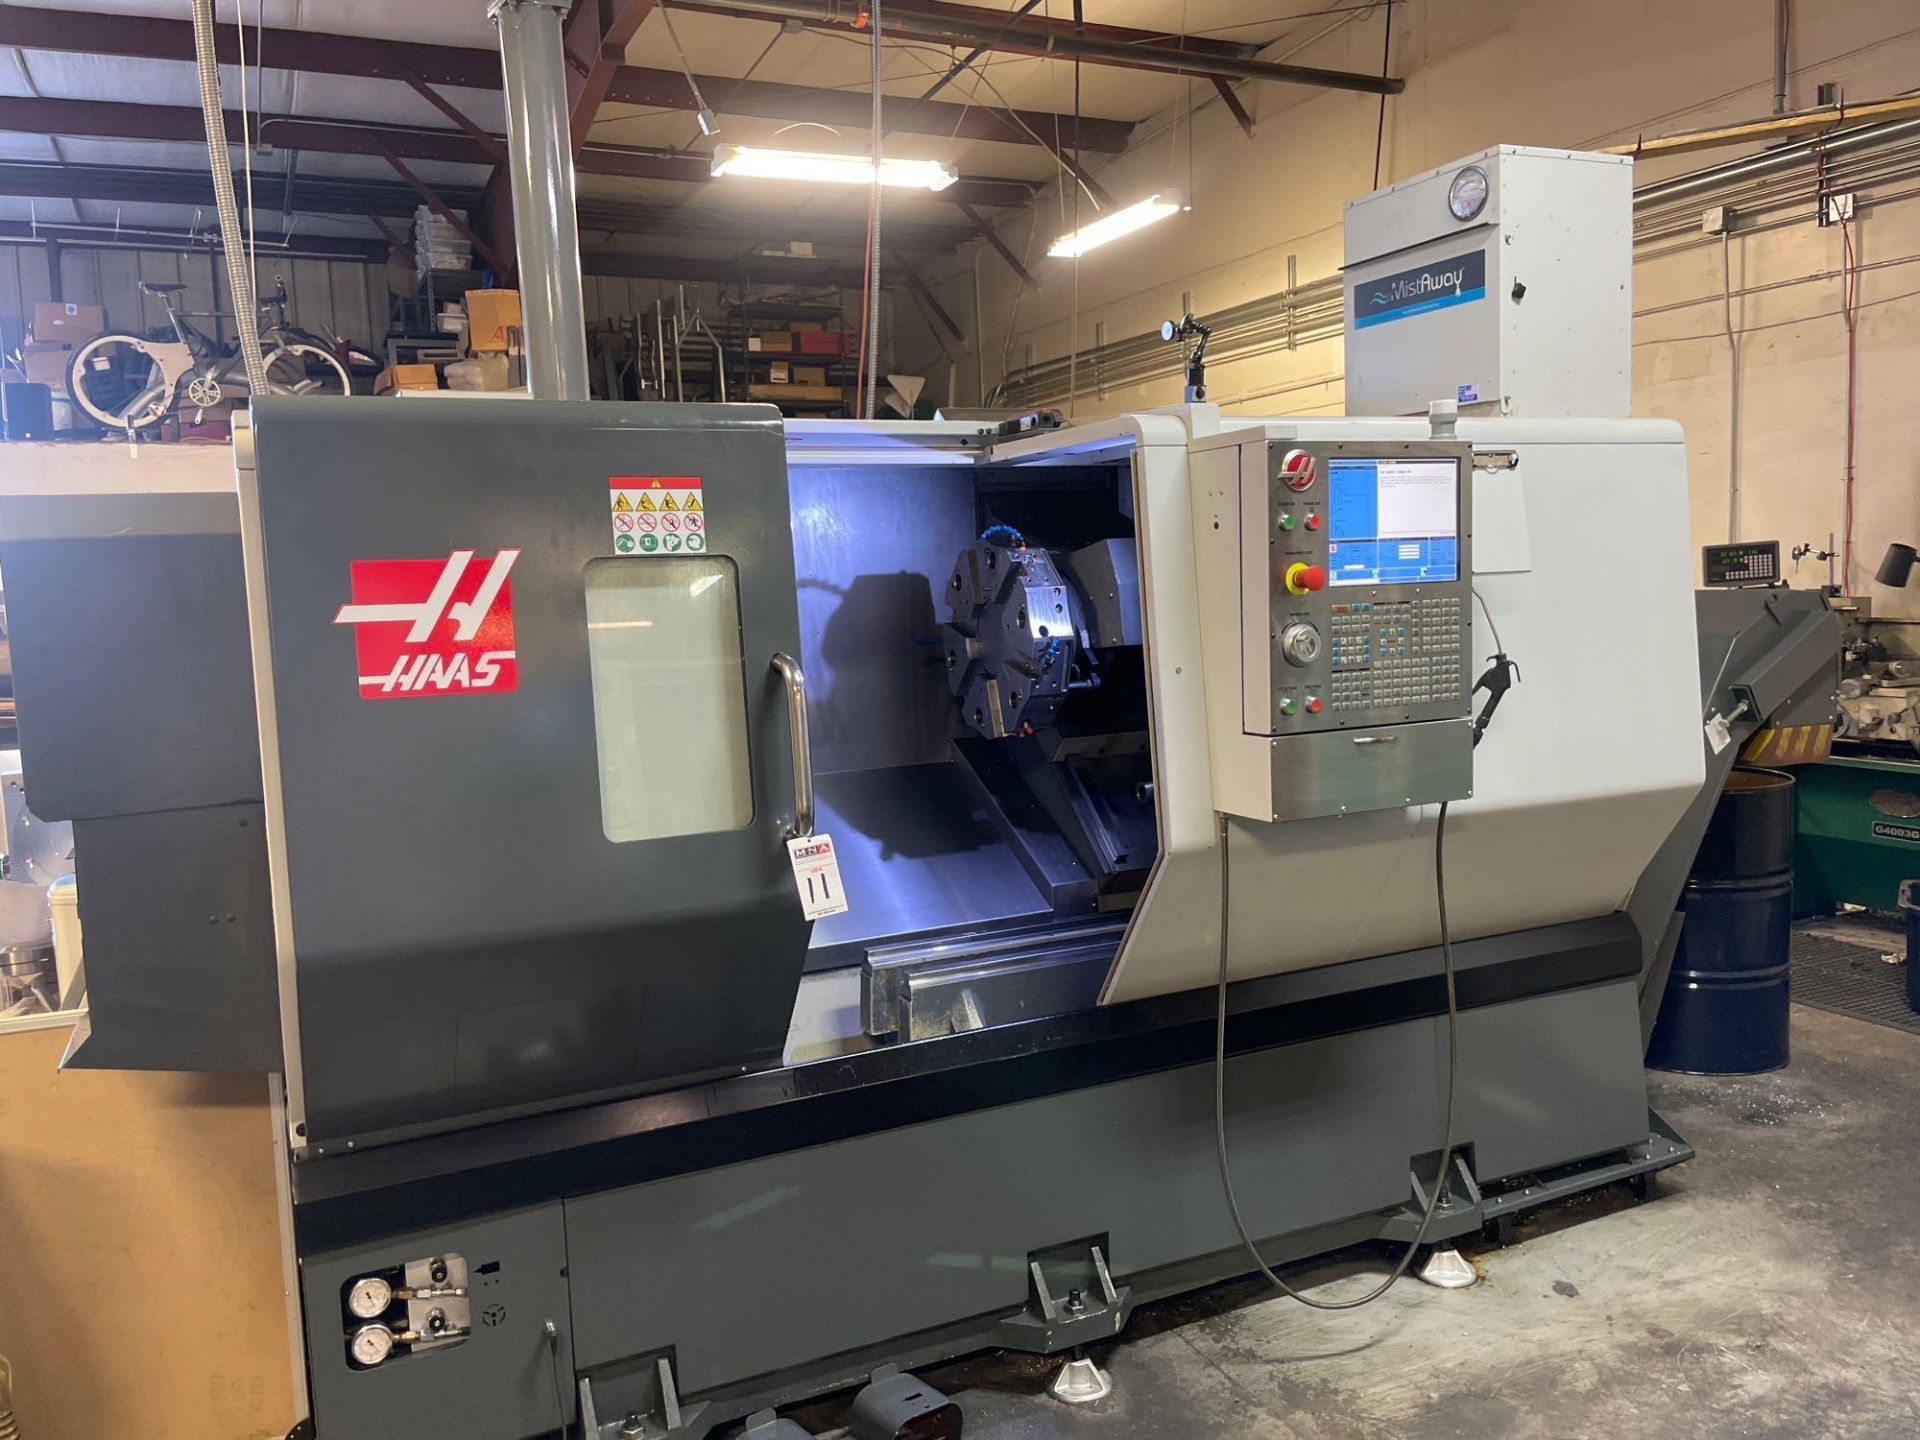 Haas ST-30 3-Axis CNC Lathe, C-Axis, 12" Hydraulic Chuck, 12 Position Turret, High Torque, New 2017 - Image 3 of 12